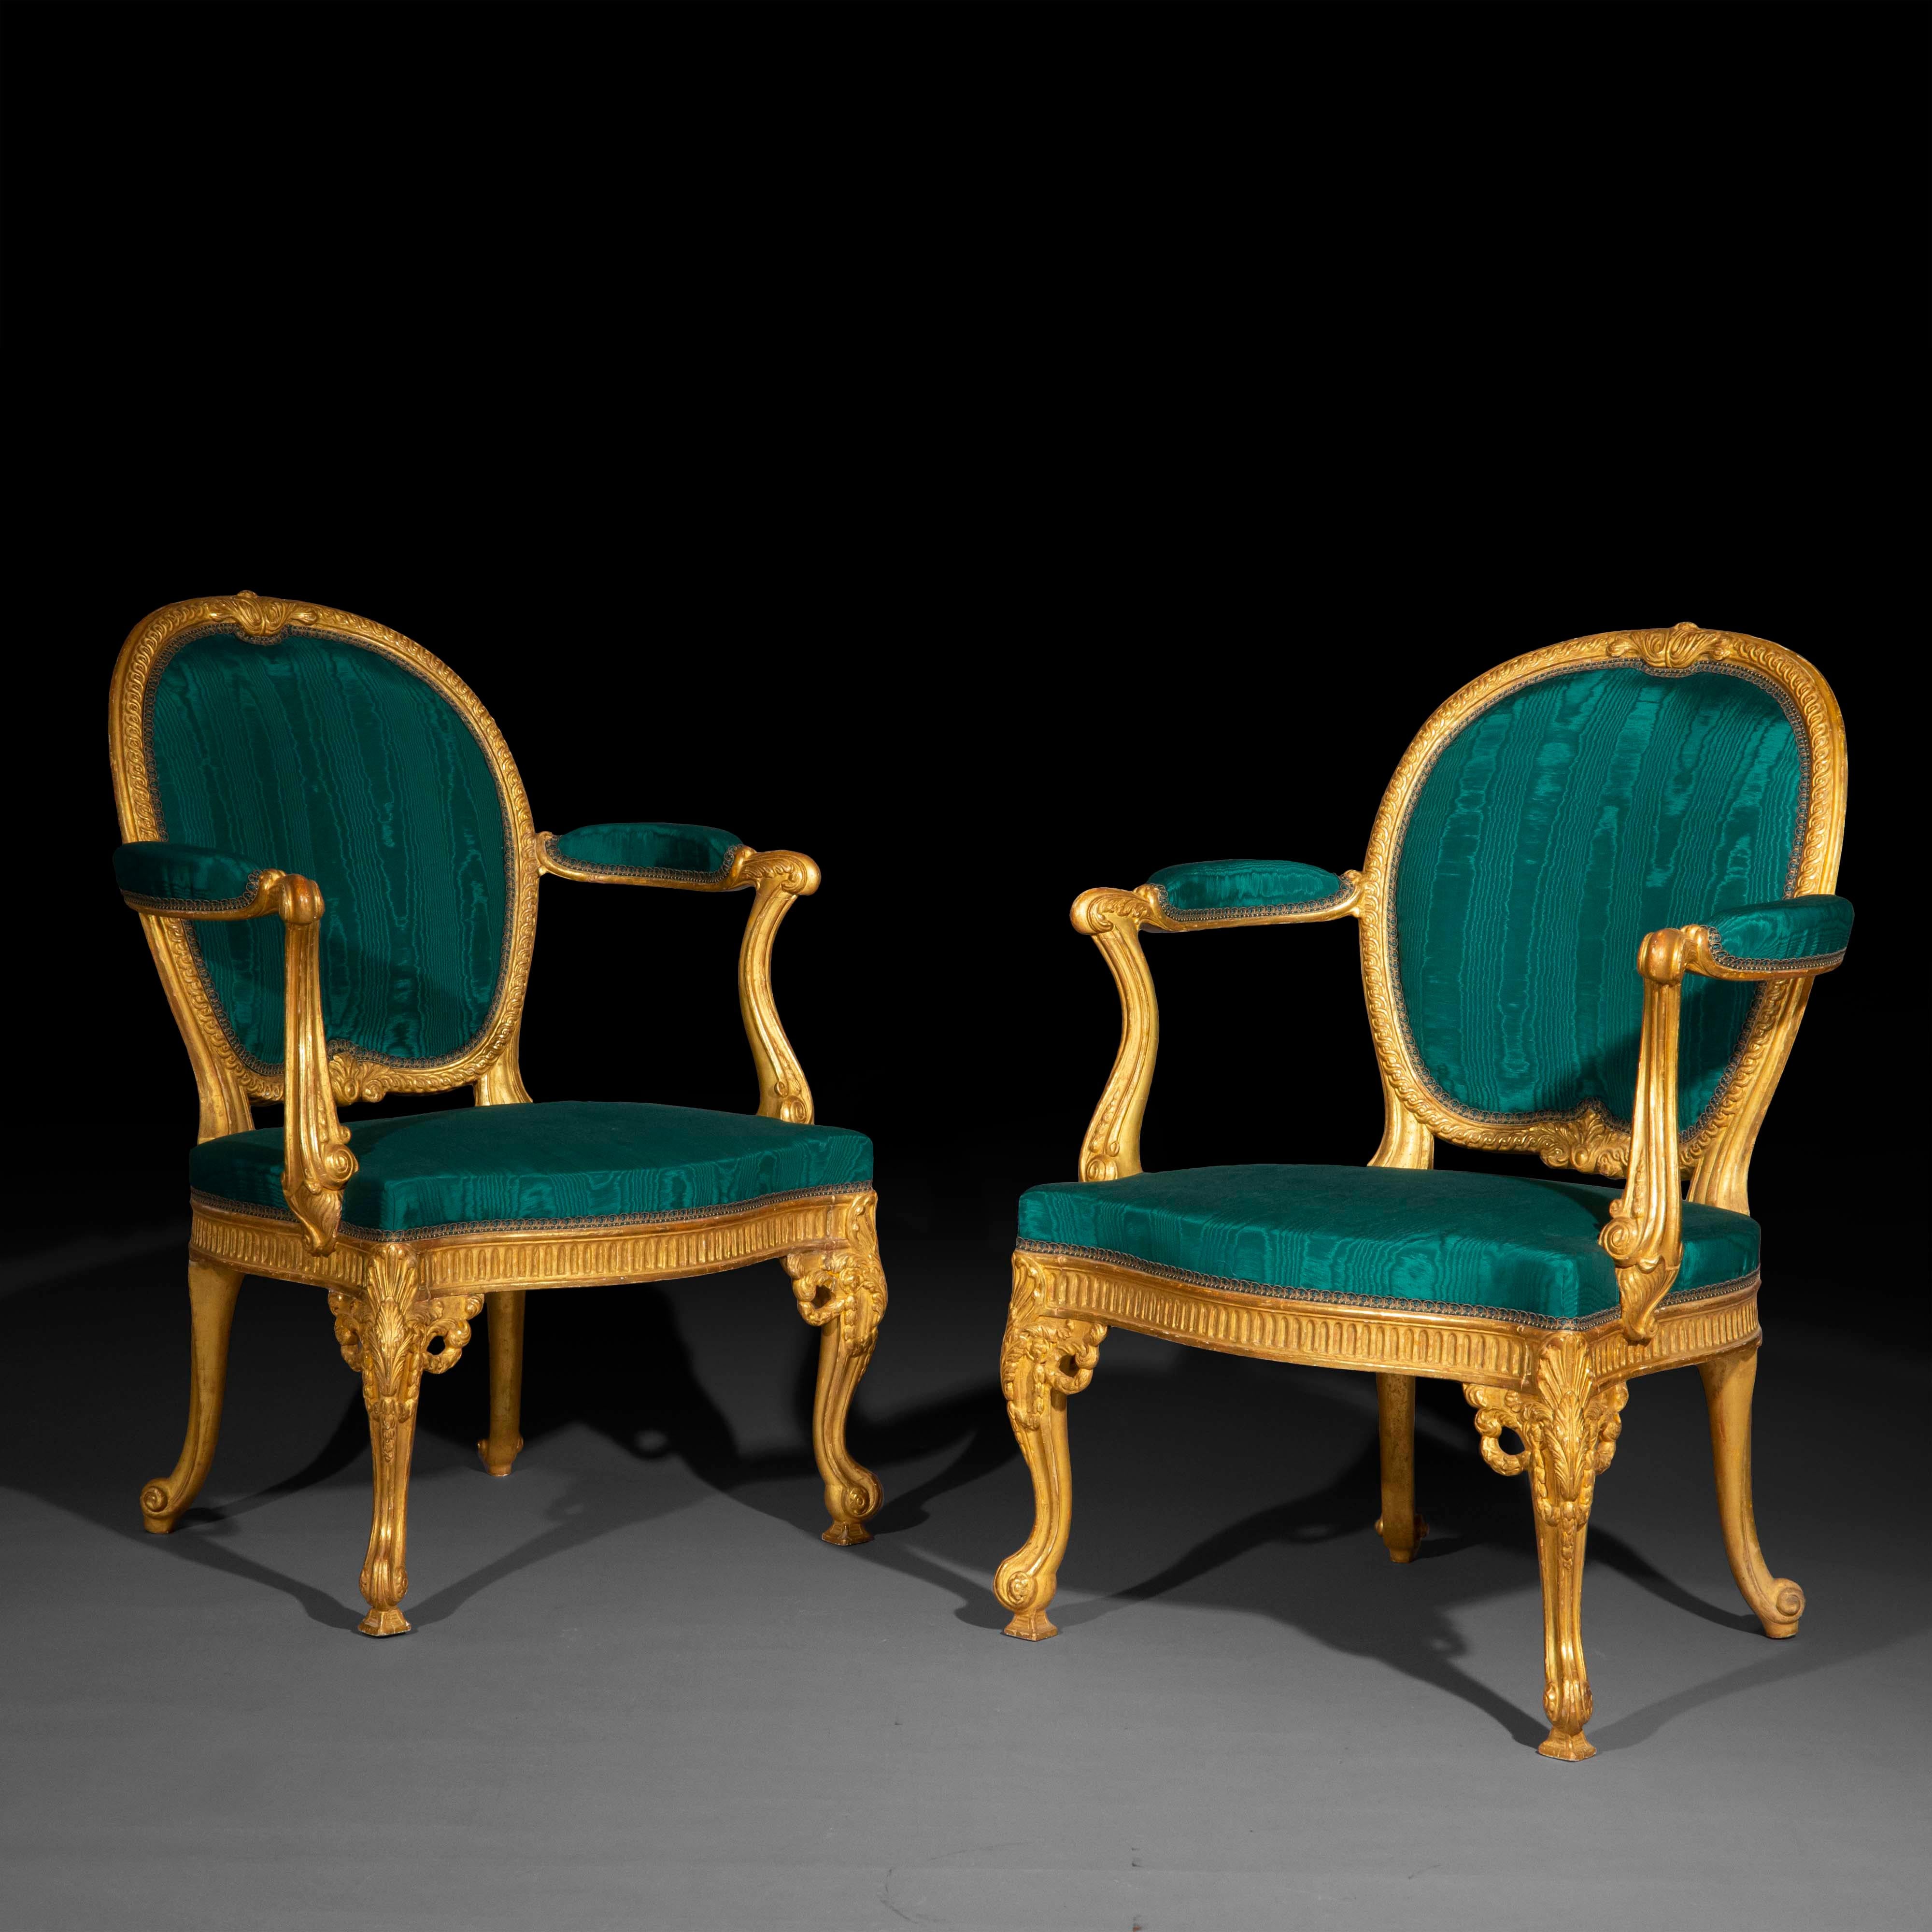 Neoclassical Pair of Giltwood Armchairs after Thomas Chippendale